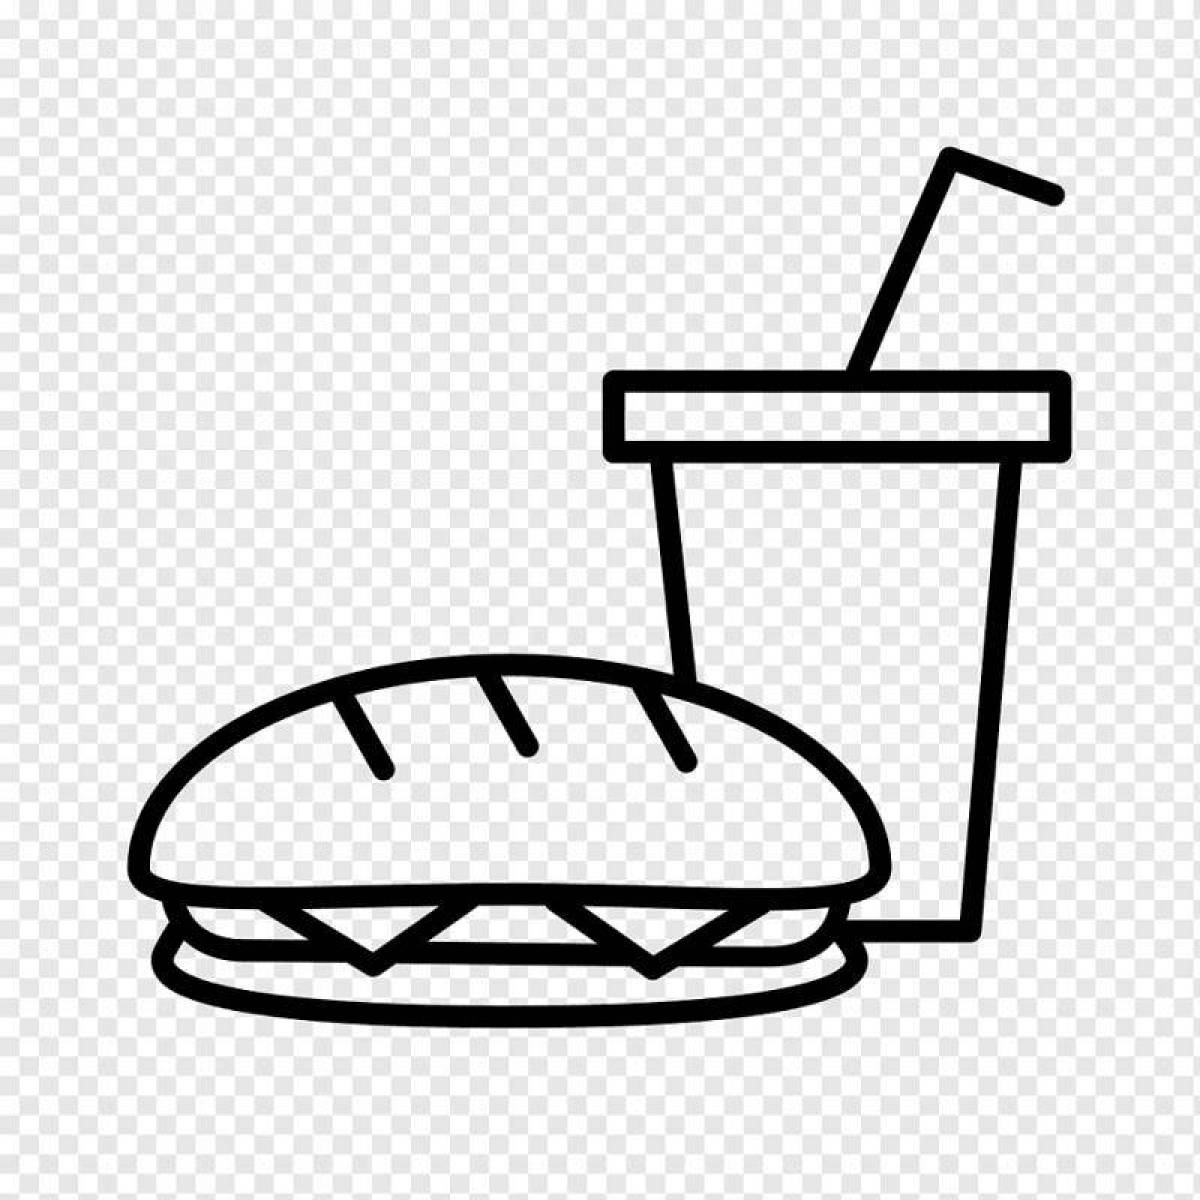 Crispy burger and fries coloring page